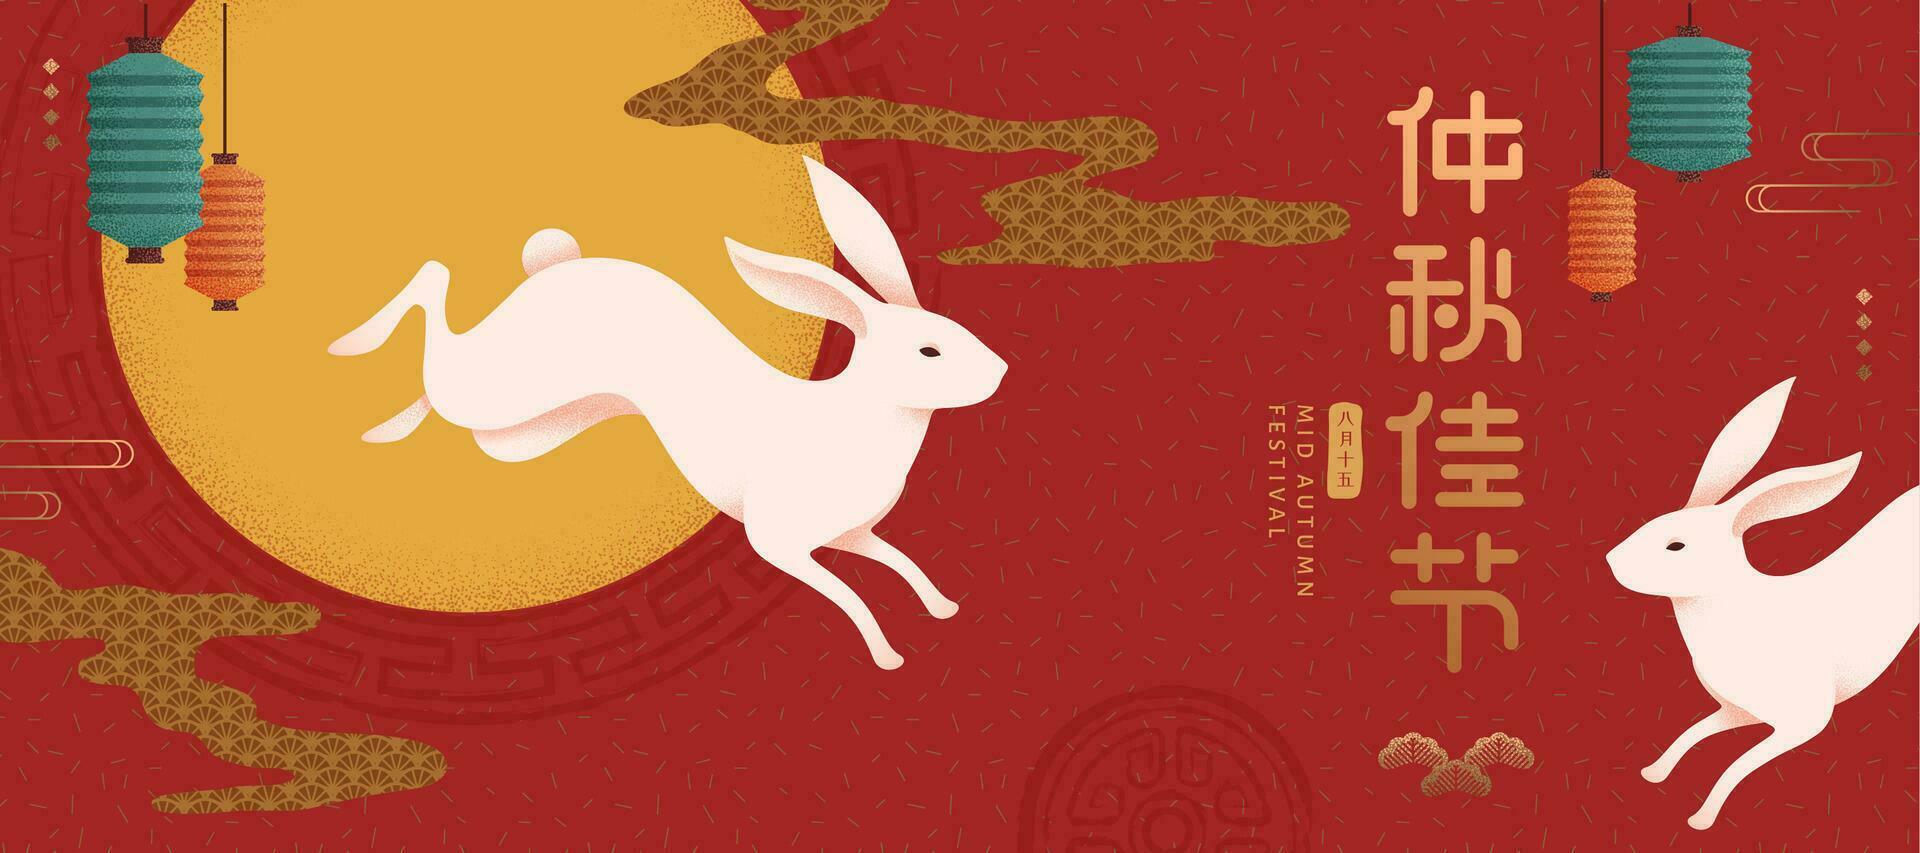 Mid autumn illustration with jade rabbit and hanging paper lanterns on red full moon background, Happy moon festival written in Chinese words vector